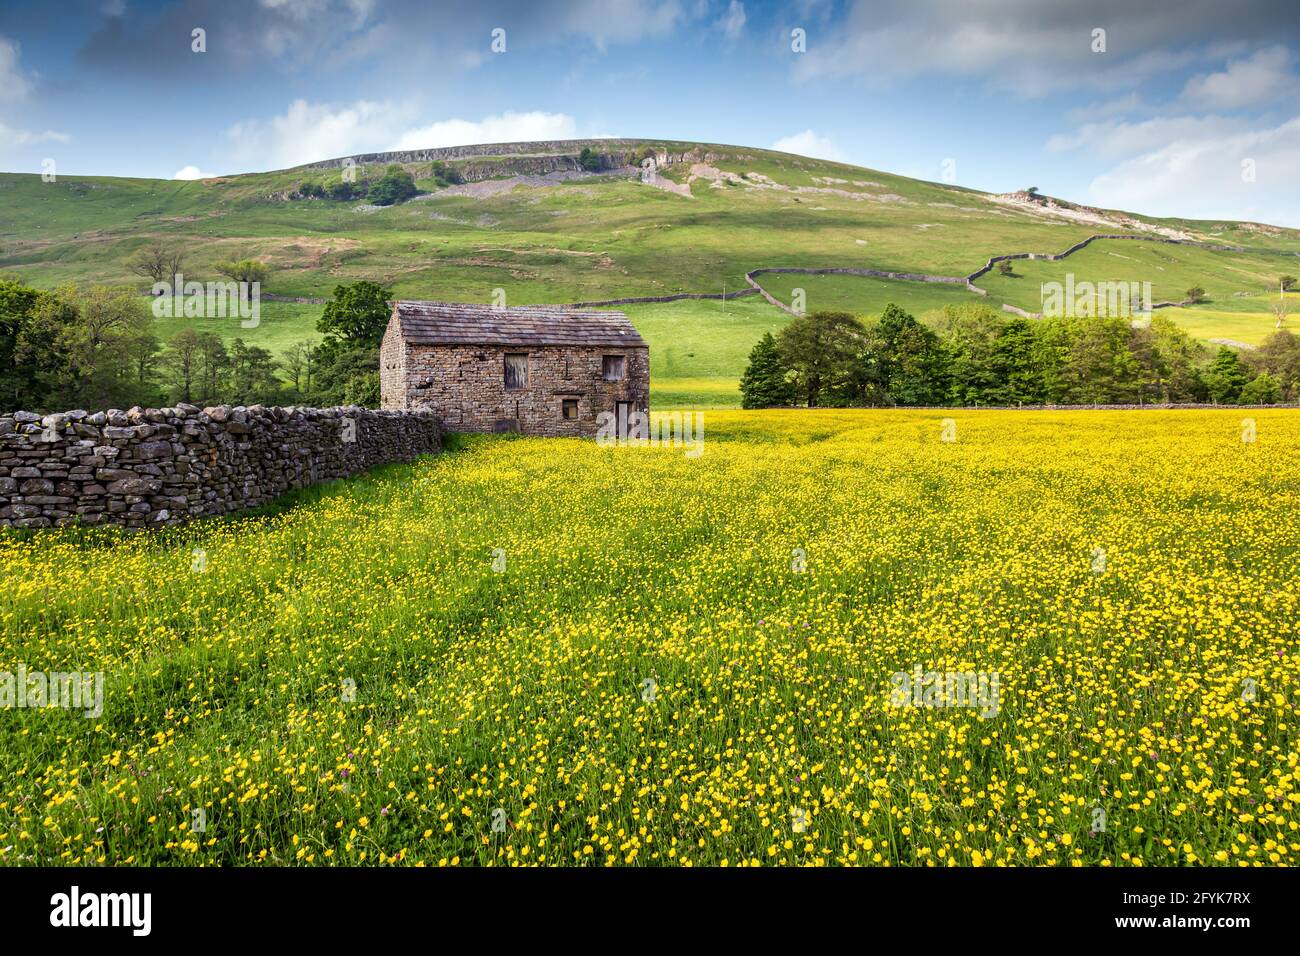 A field of beautiful vibrant yellow buttercups and an old stone barn in Swaledale, Yorkshire Dales. Stock Photo